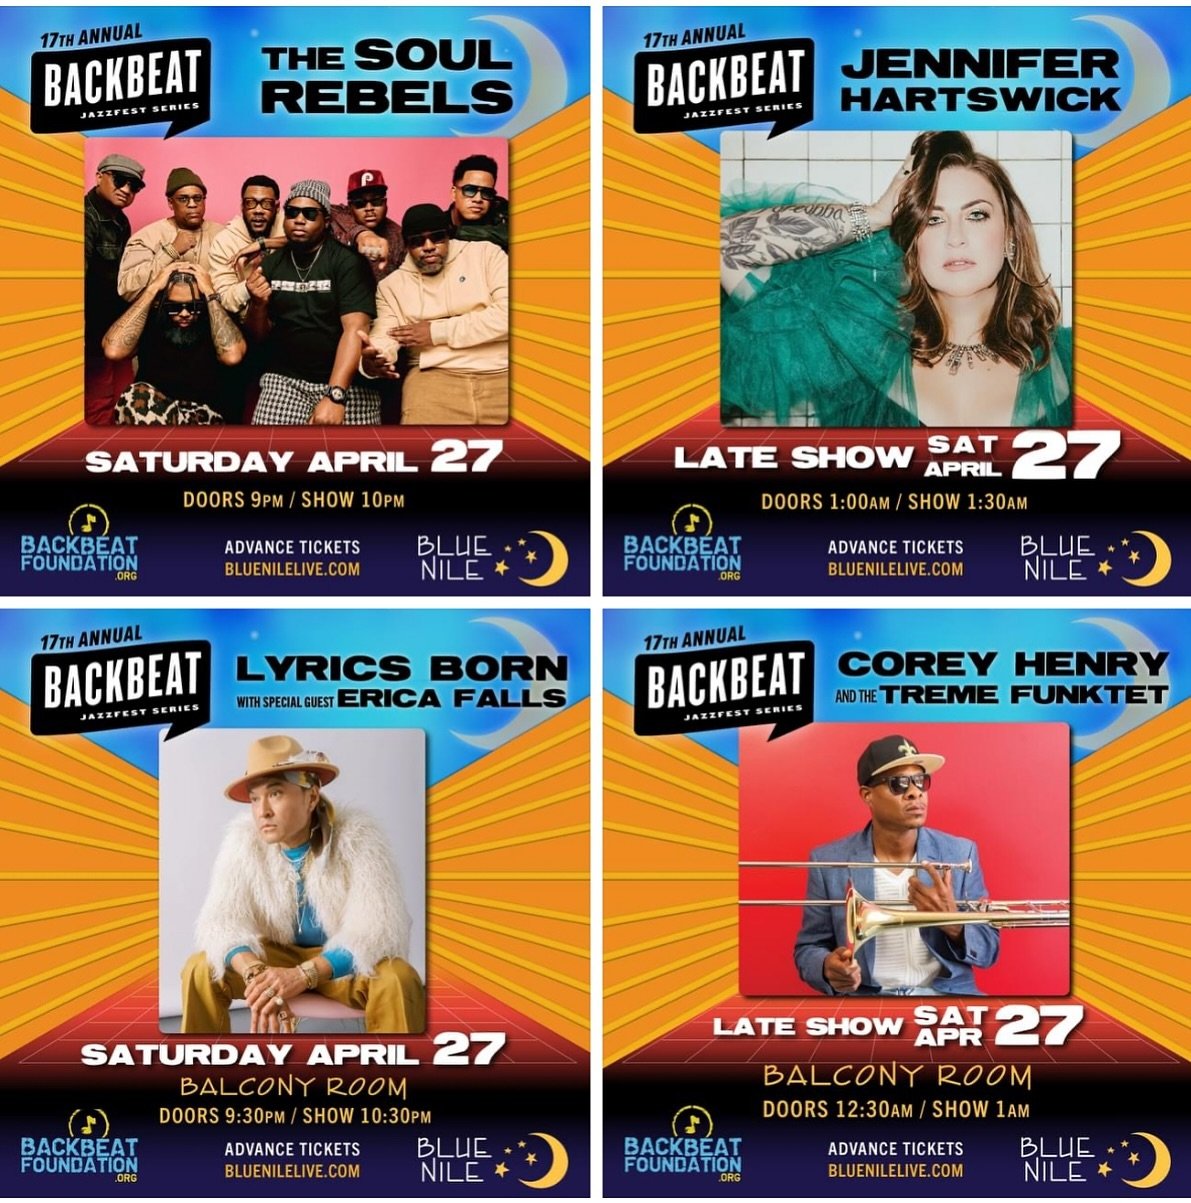 See YOU at the Blue Nile TONIGHT if you know what&rsquo;s GOOD!
Advance tickets (while they last) bluenilelive.com
✨🌙
George Brown Band 8PM
The Soul Rebels, Jennifer Hartswick downstairs
Lyrics Born with Erica Falls, Corey Henry &amp; the Treme Funk